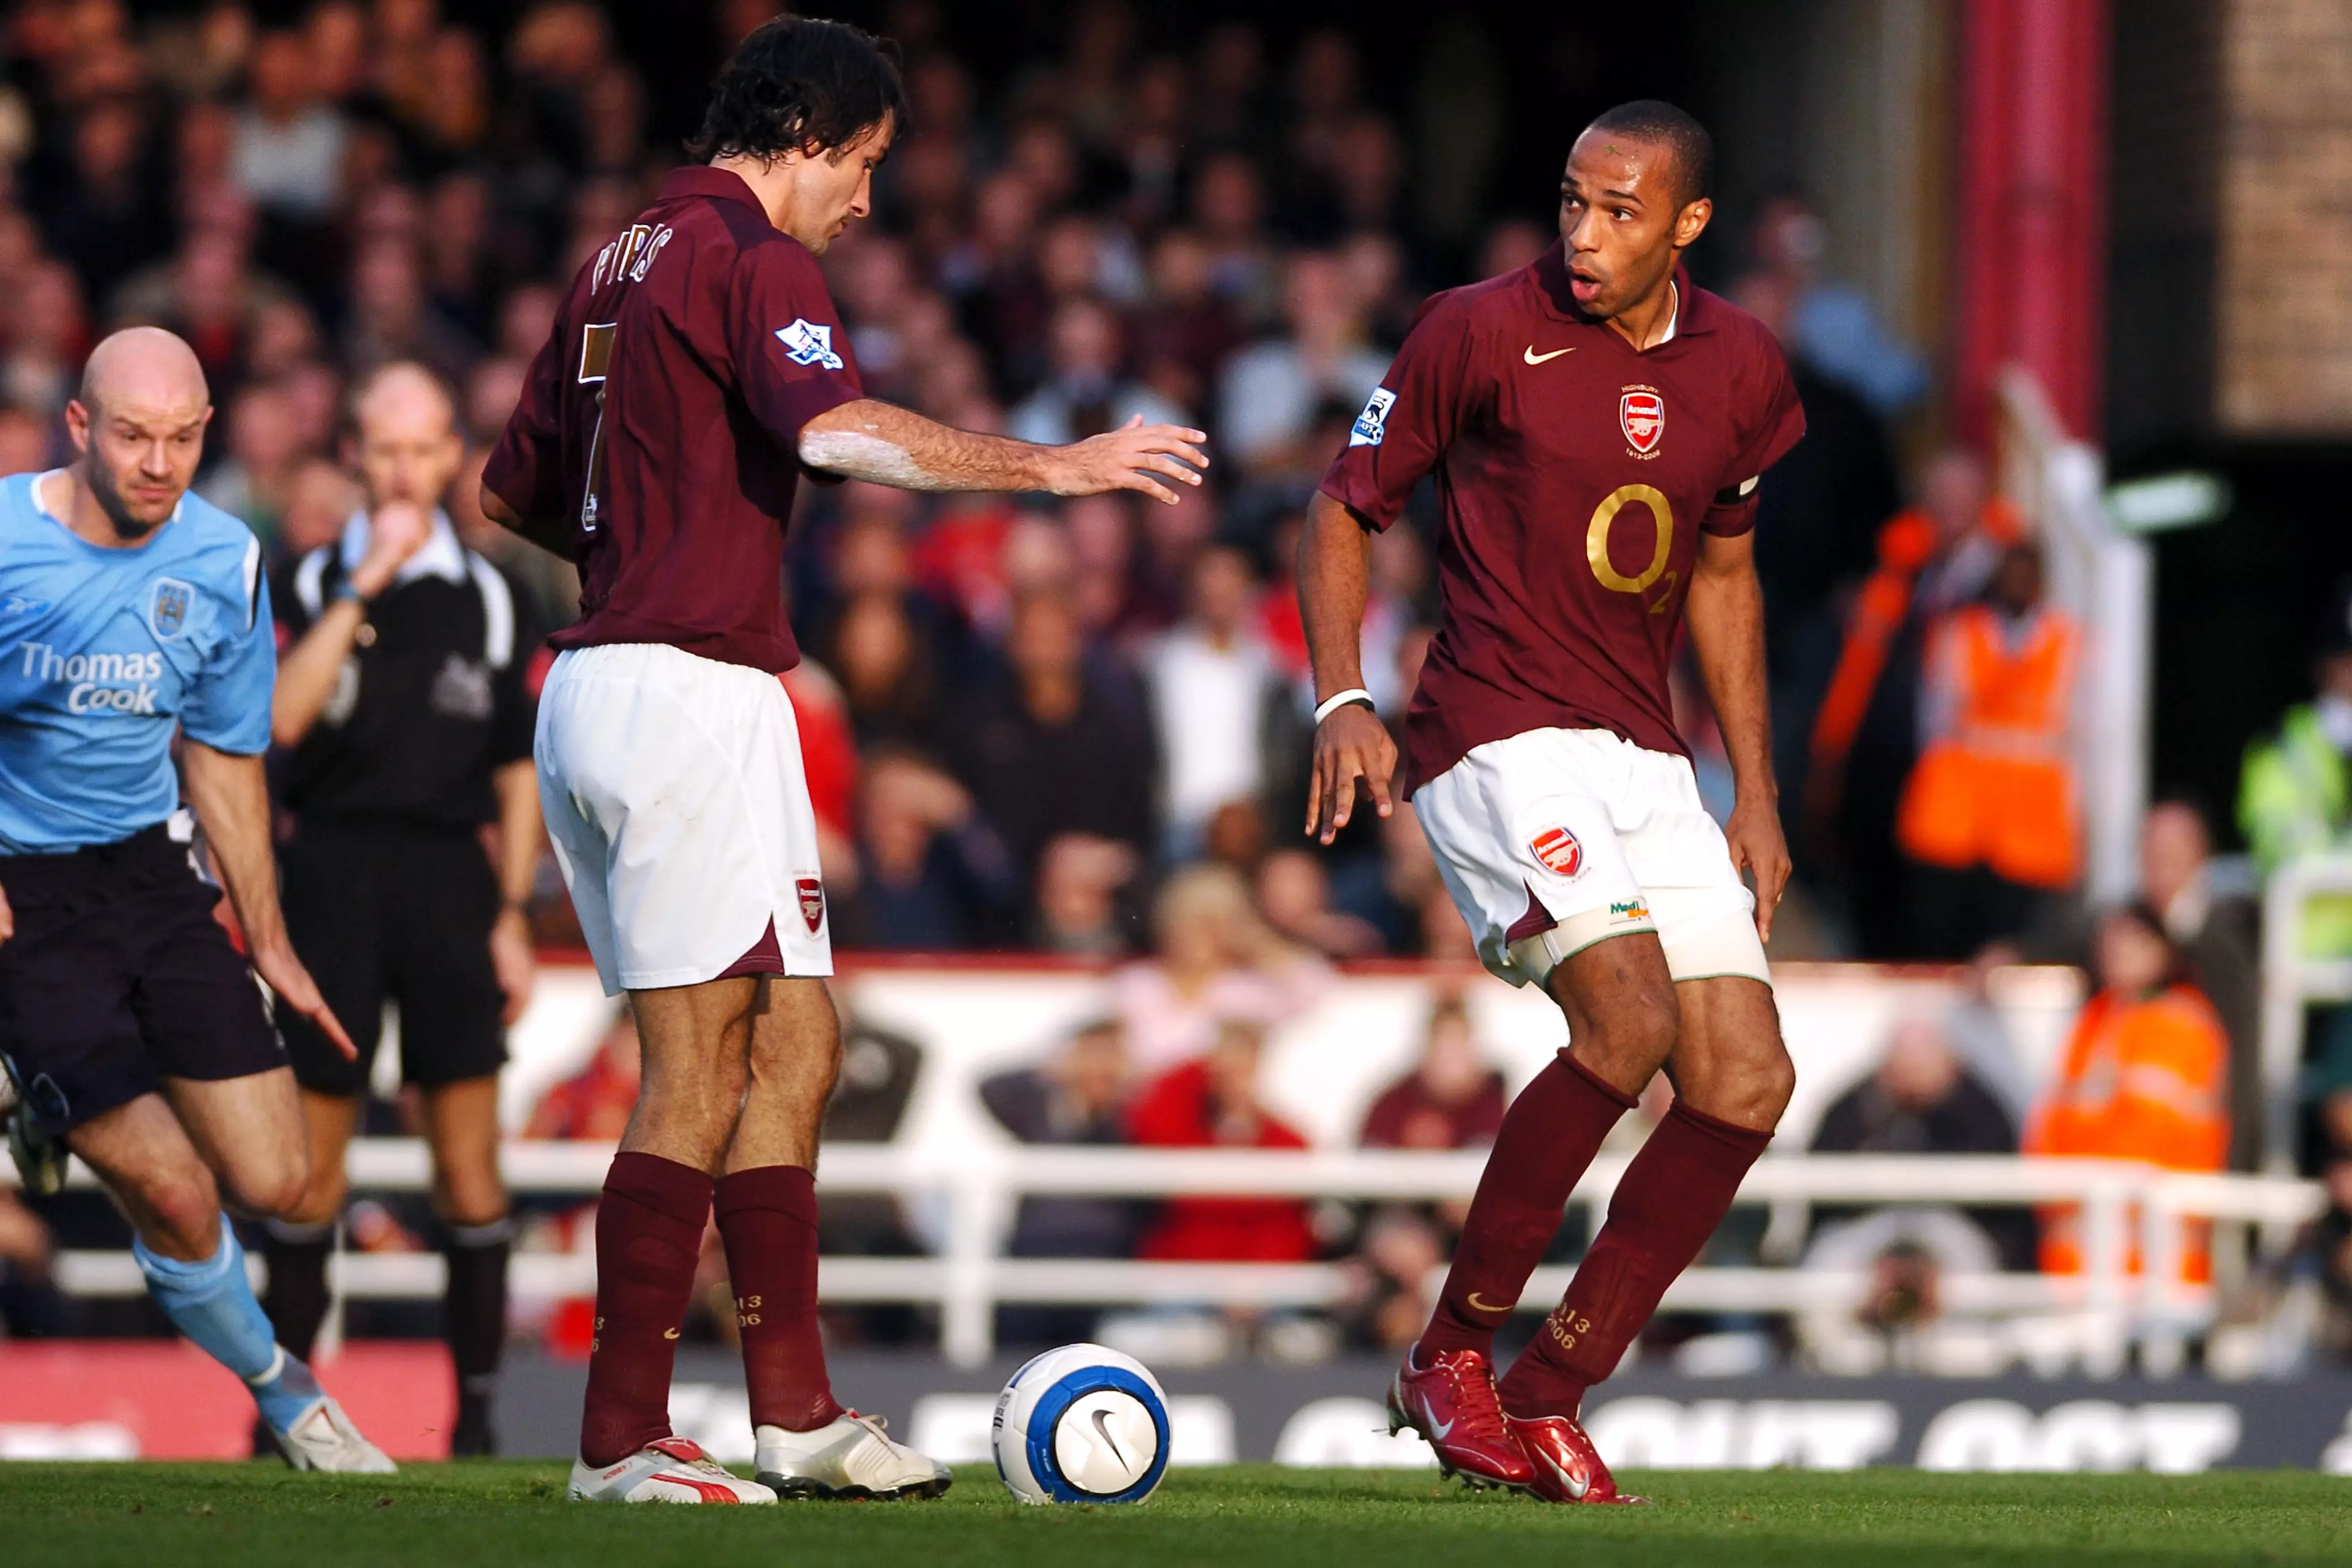 Henry clearly knows it was a mistake. Image: PA Images